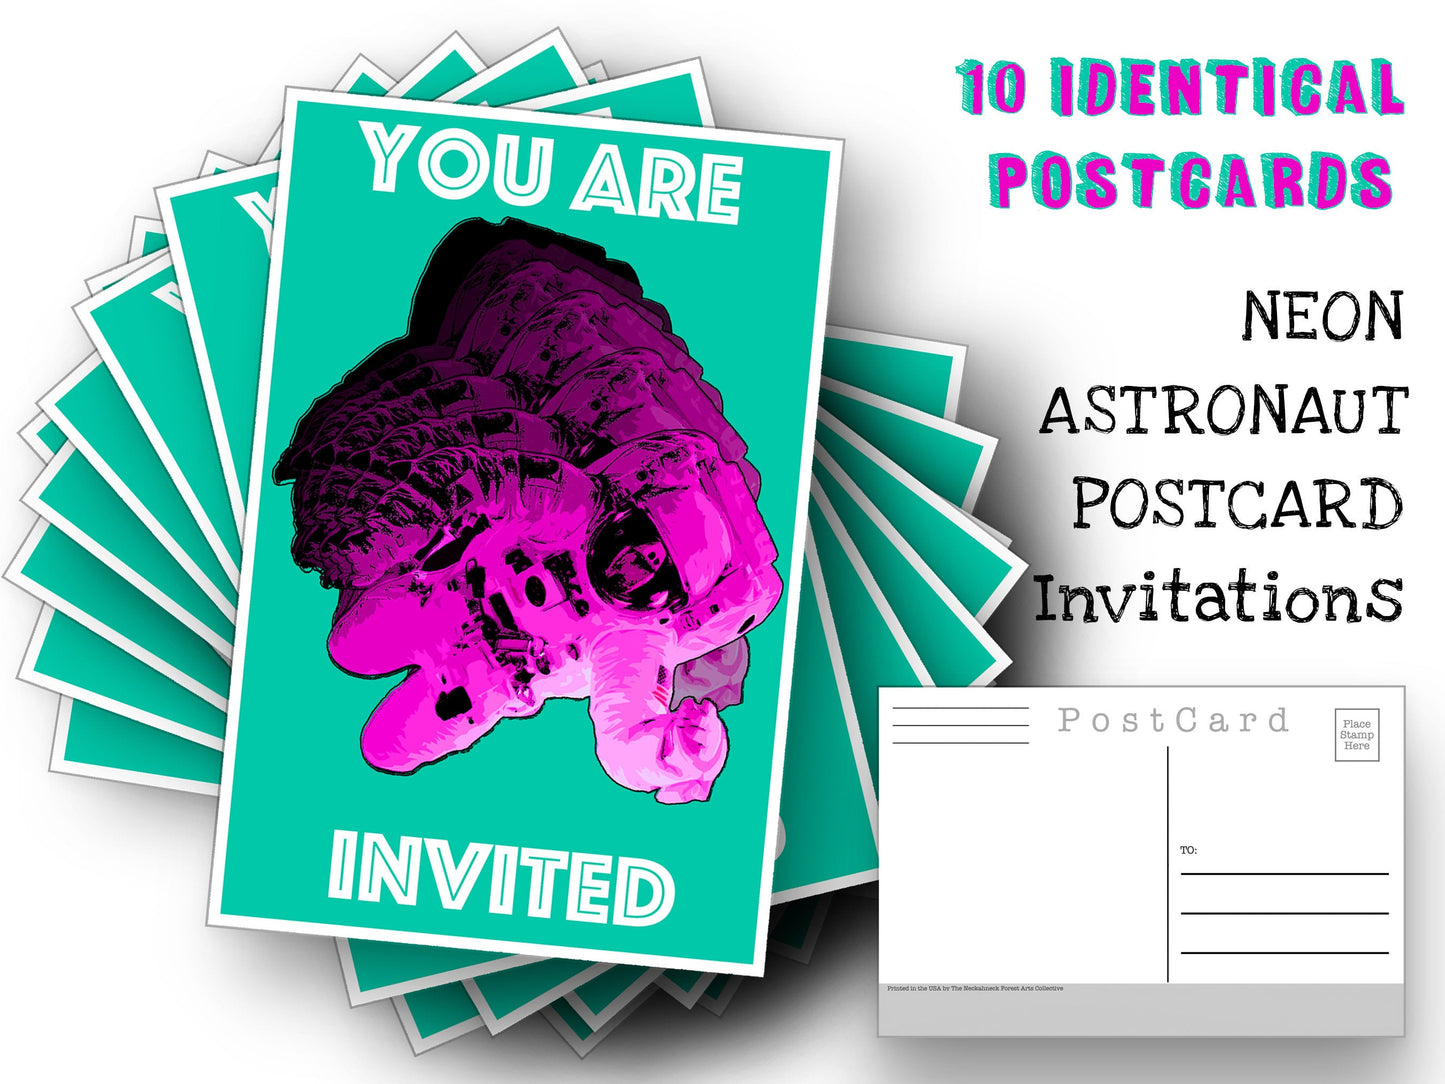 Neon Astronaut Invitation Postcards - 10 post card set - Great invitations - Space - Astronaut Post Card for mailing collage or scrapbook